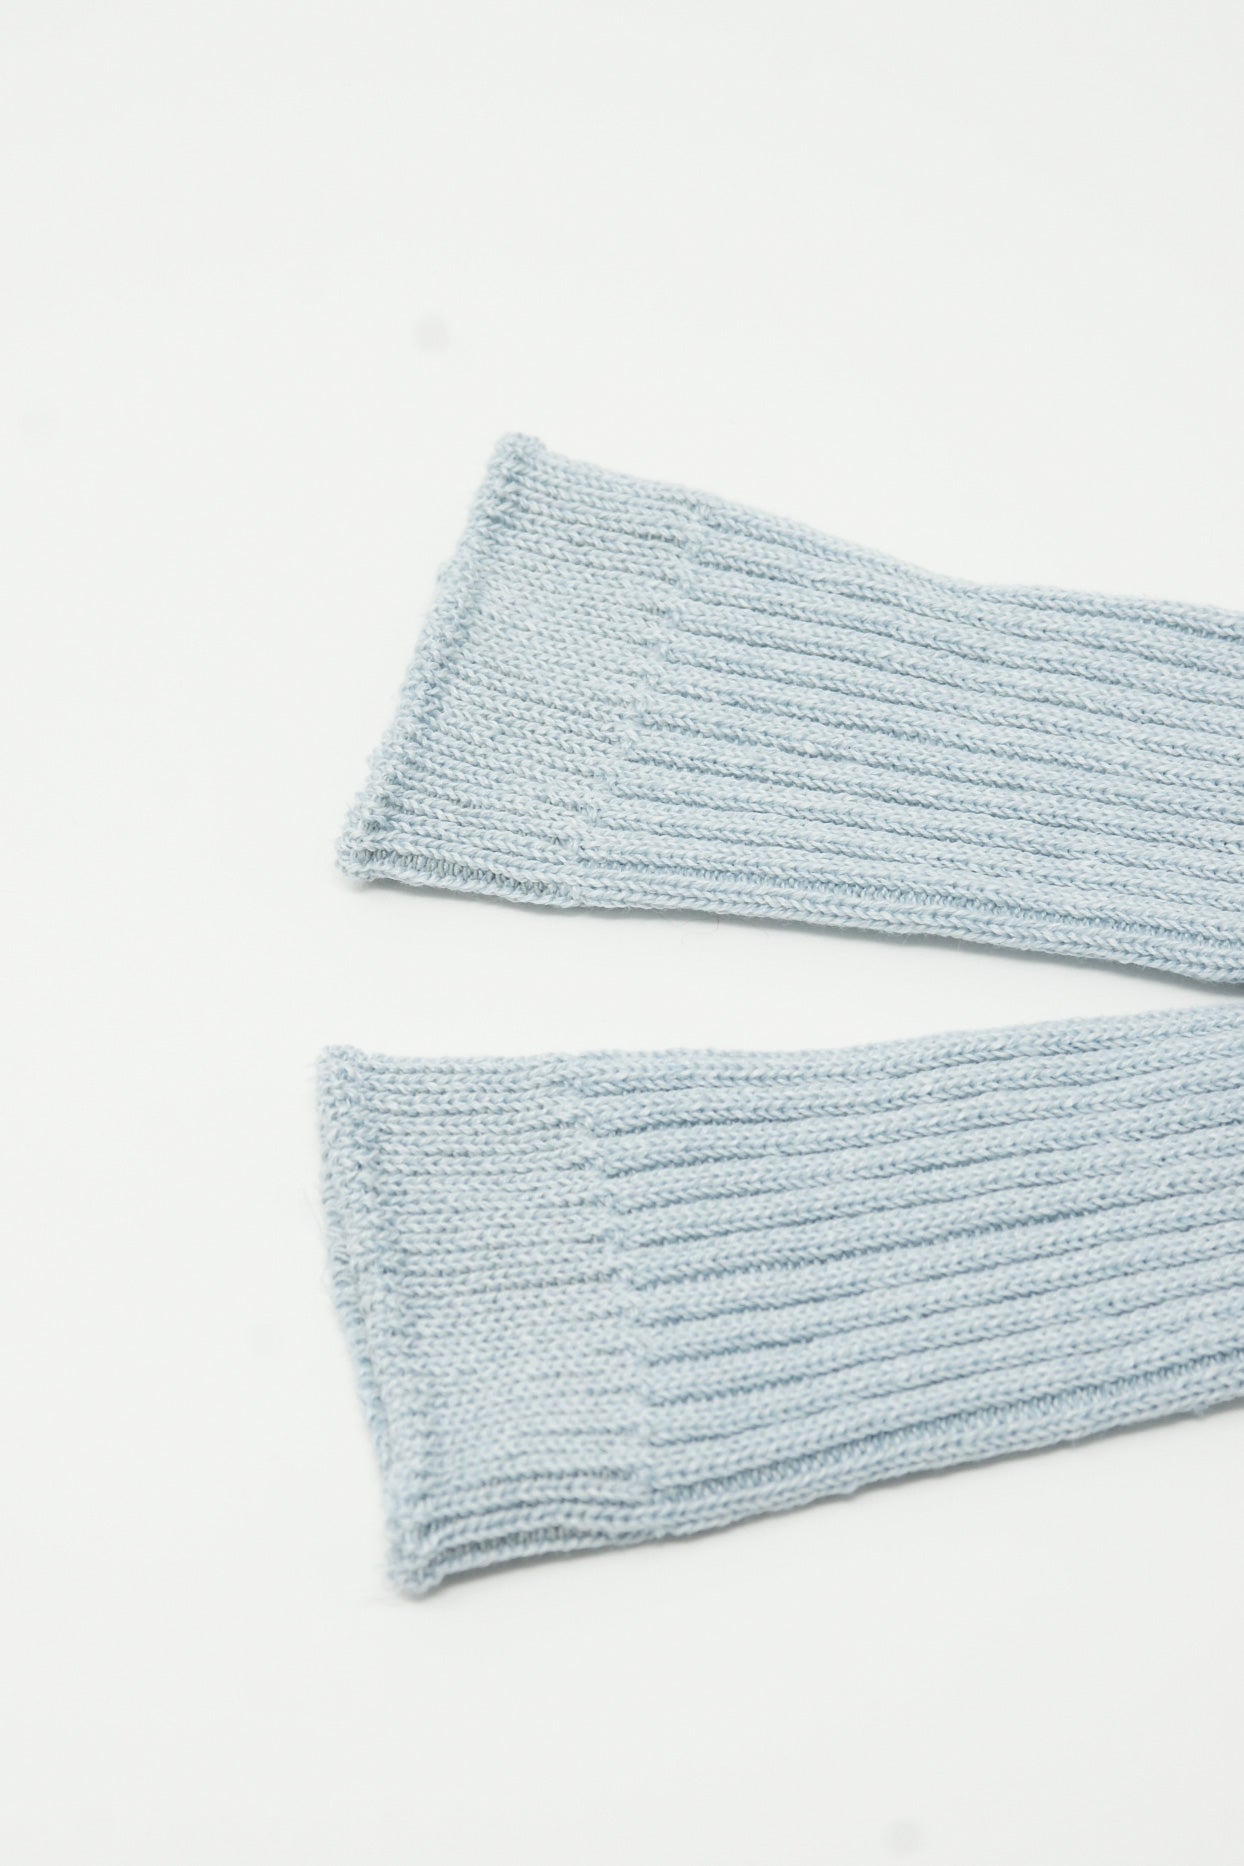 A pair of Linen Rib Socks in Light Blue by Ichi Antiquités on a white surface.